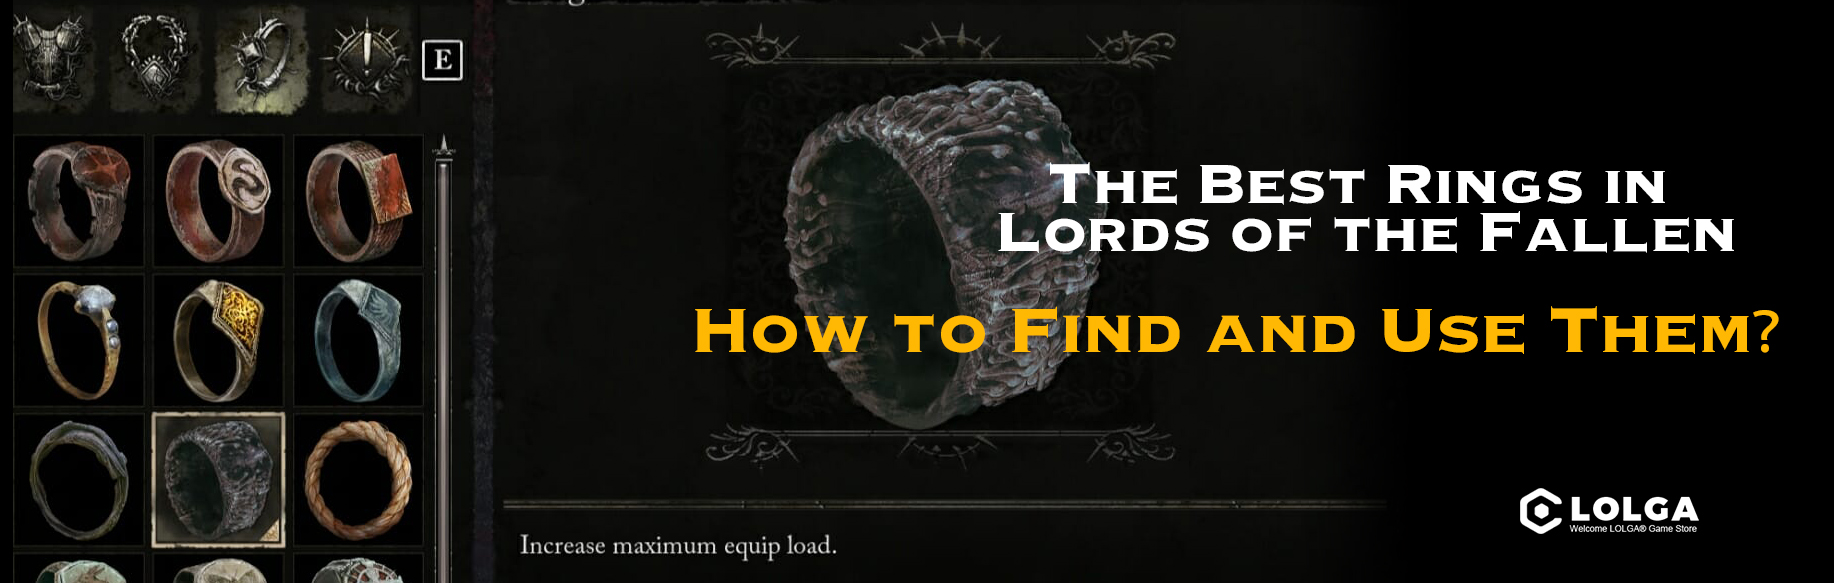 The Best Rings in Lords of the Fallen: How to Find and Use Them？